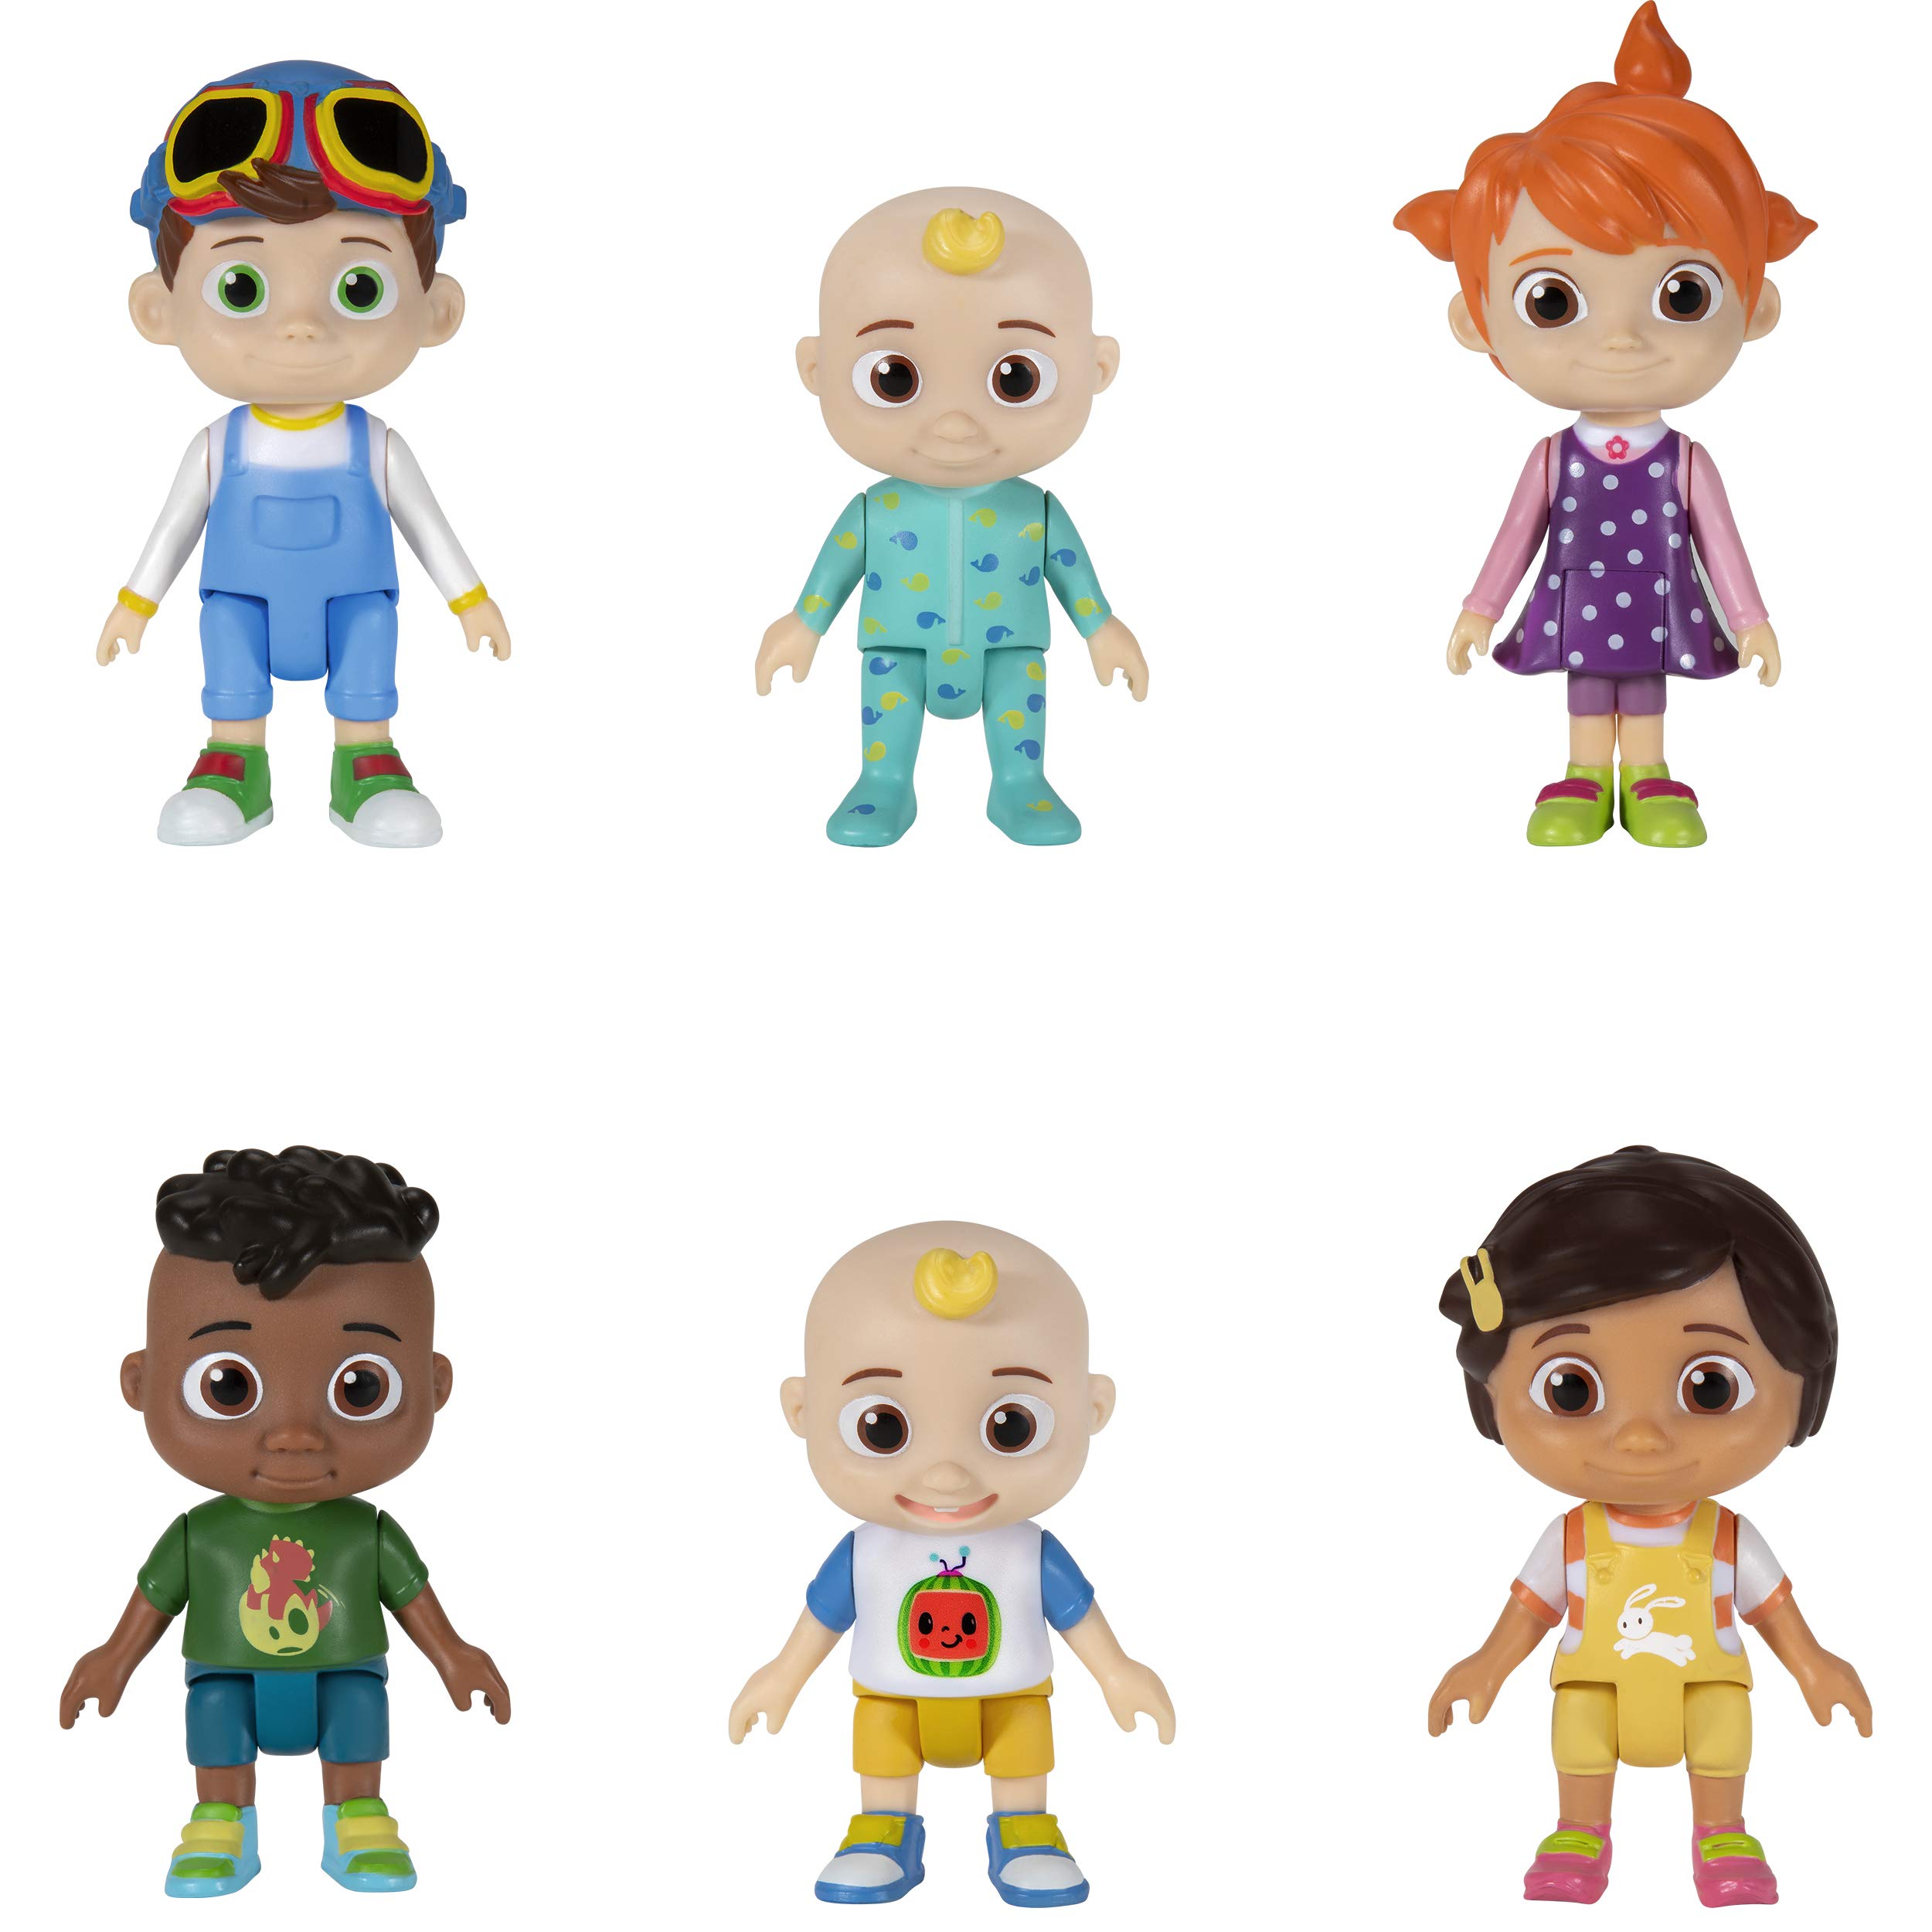 Buy Cocomelon Official Friends & Family, 6 Figure Pack Inch Character Toys Two Baby JJ Figures (Tee and Onesie), Tomtom, YoYo, Cody, and Nina for Babies and Toddlers